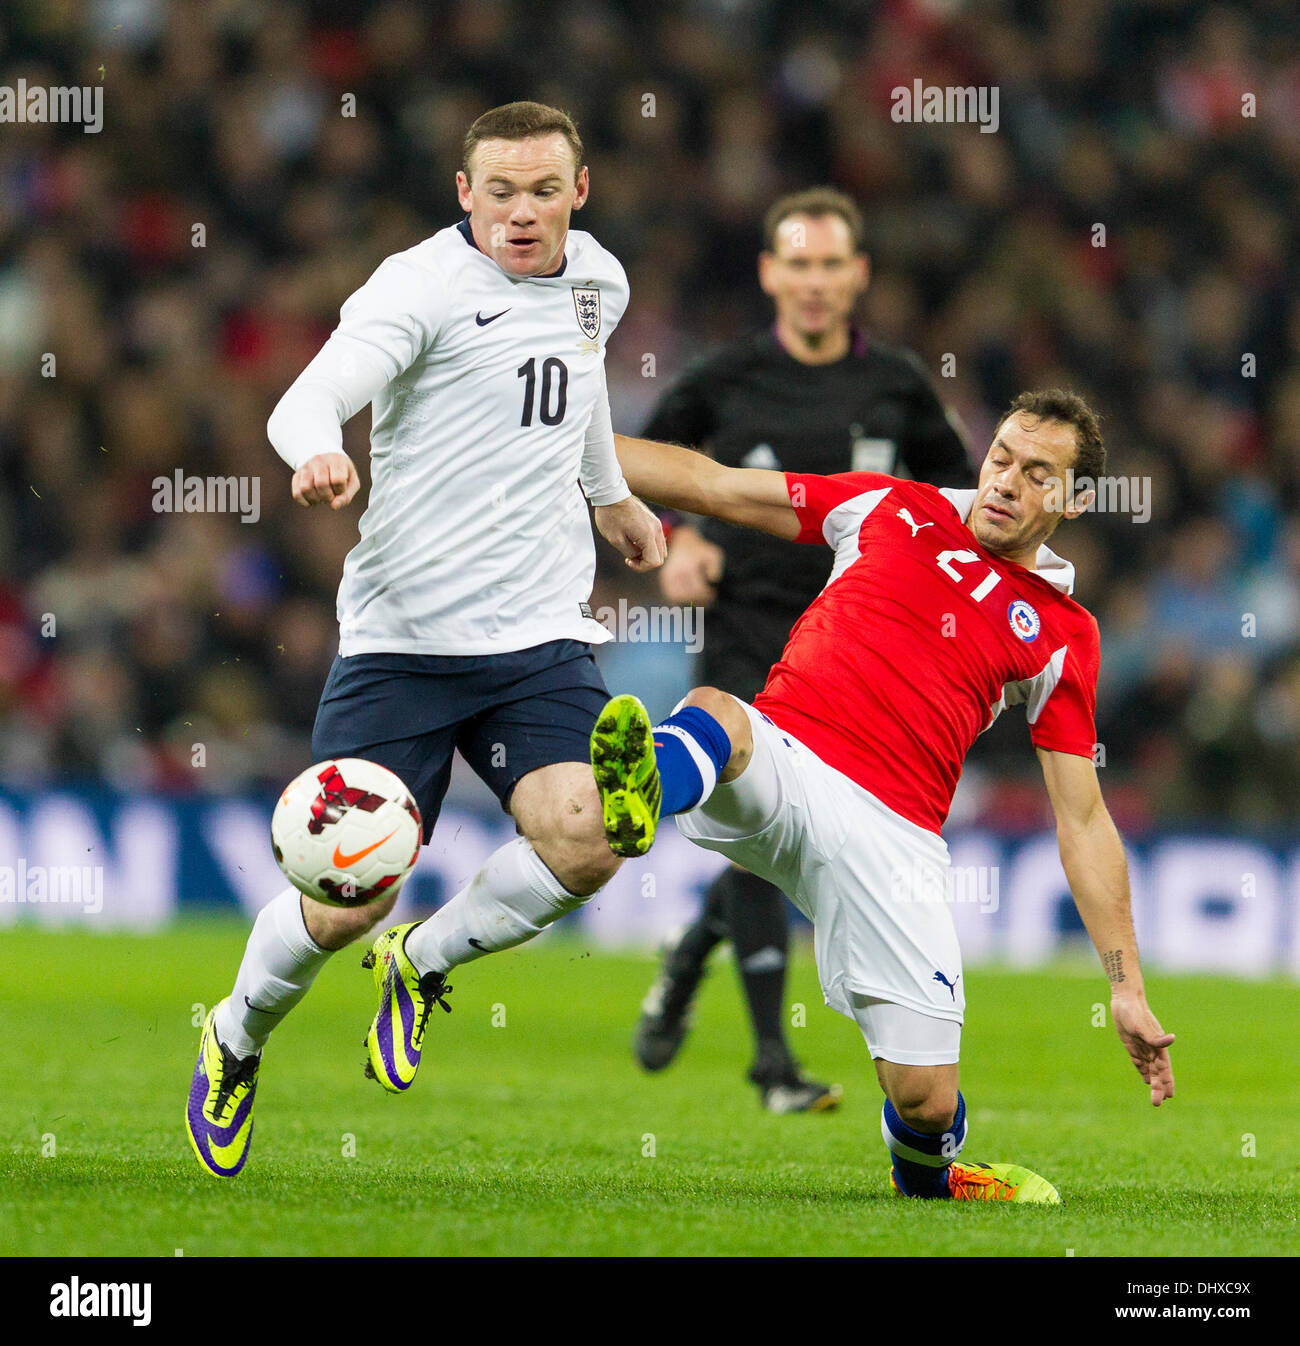 London, UK. 15th Nov, 2013. England's Wayne ROONEY in a challenge with Chile's Marcelo DIAZ during the International Friendly fixture between England and Chile from Wembley Stadium. Credit:  Action Plus Sports/Alamy Live News Stock Photo